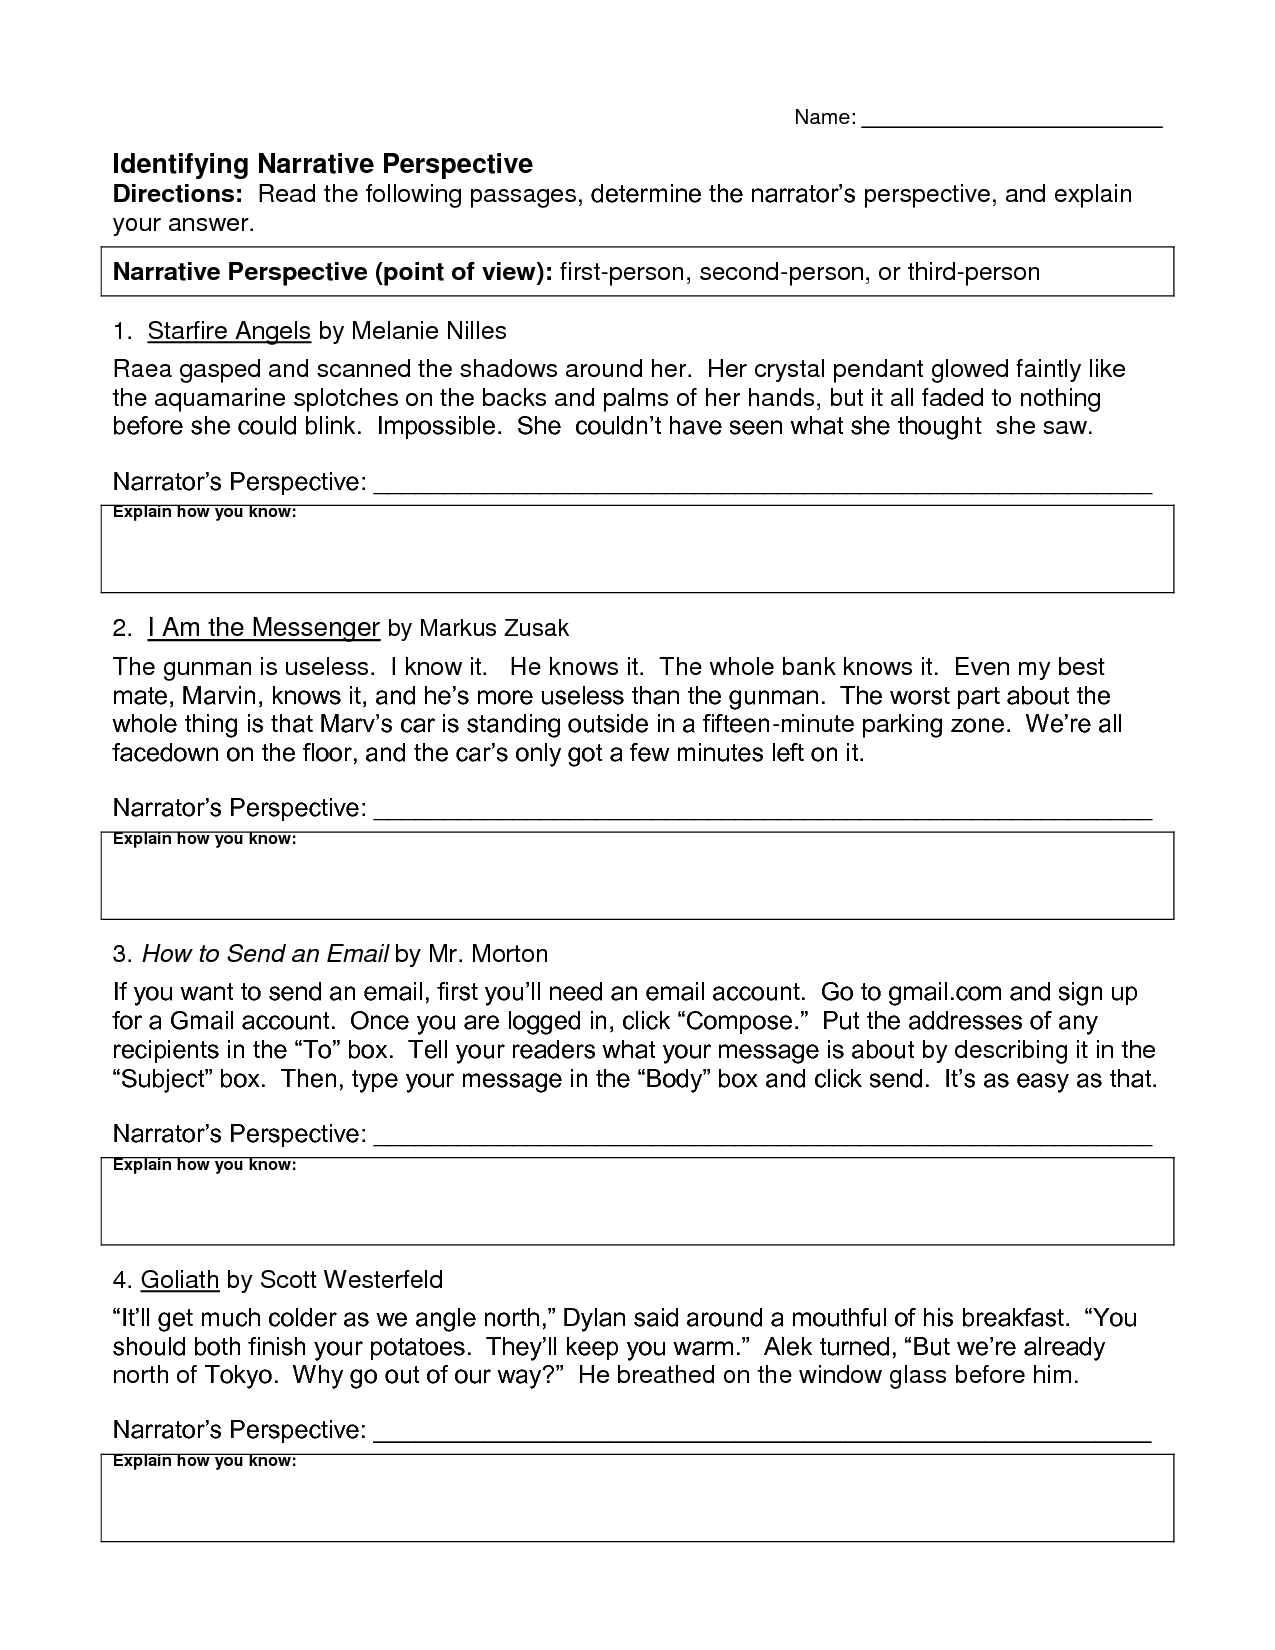 11 Best Images of Worksheets First Second Third Third Person Point Regarding Point Of View Worksheet 11